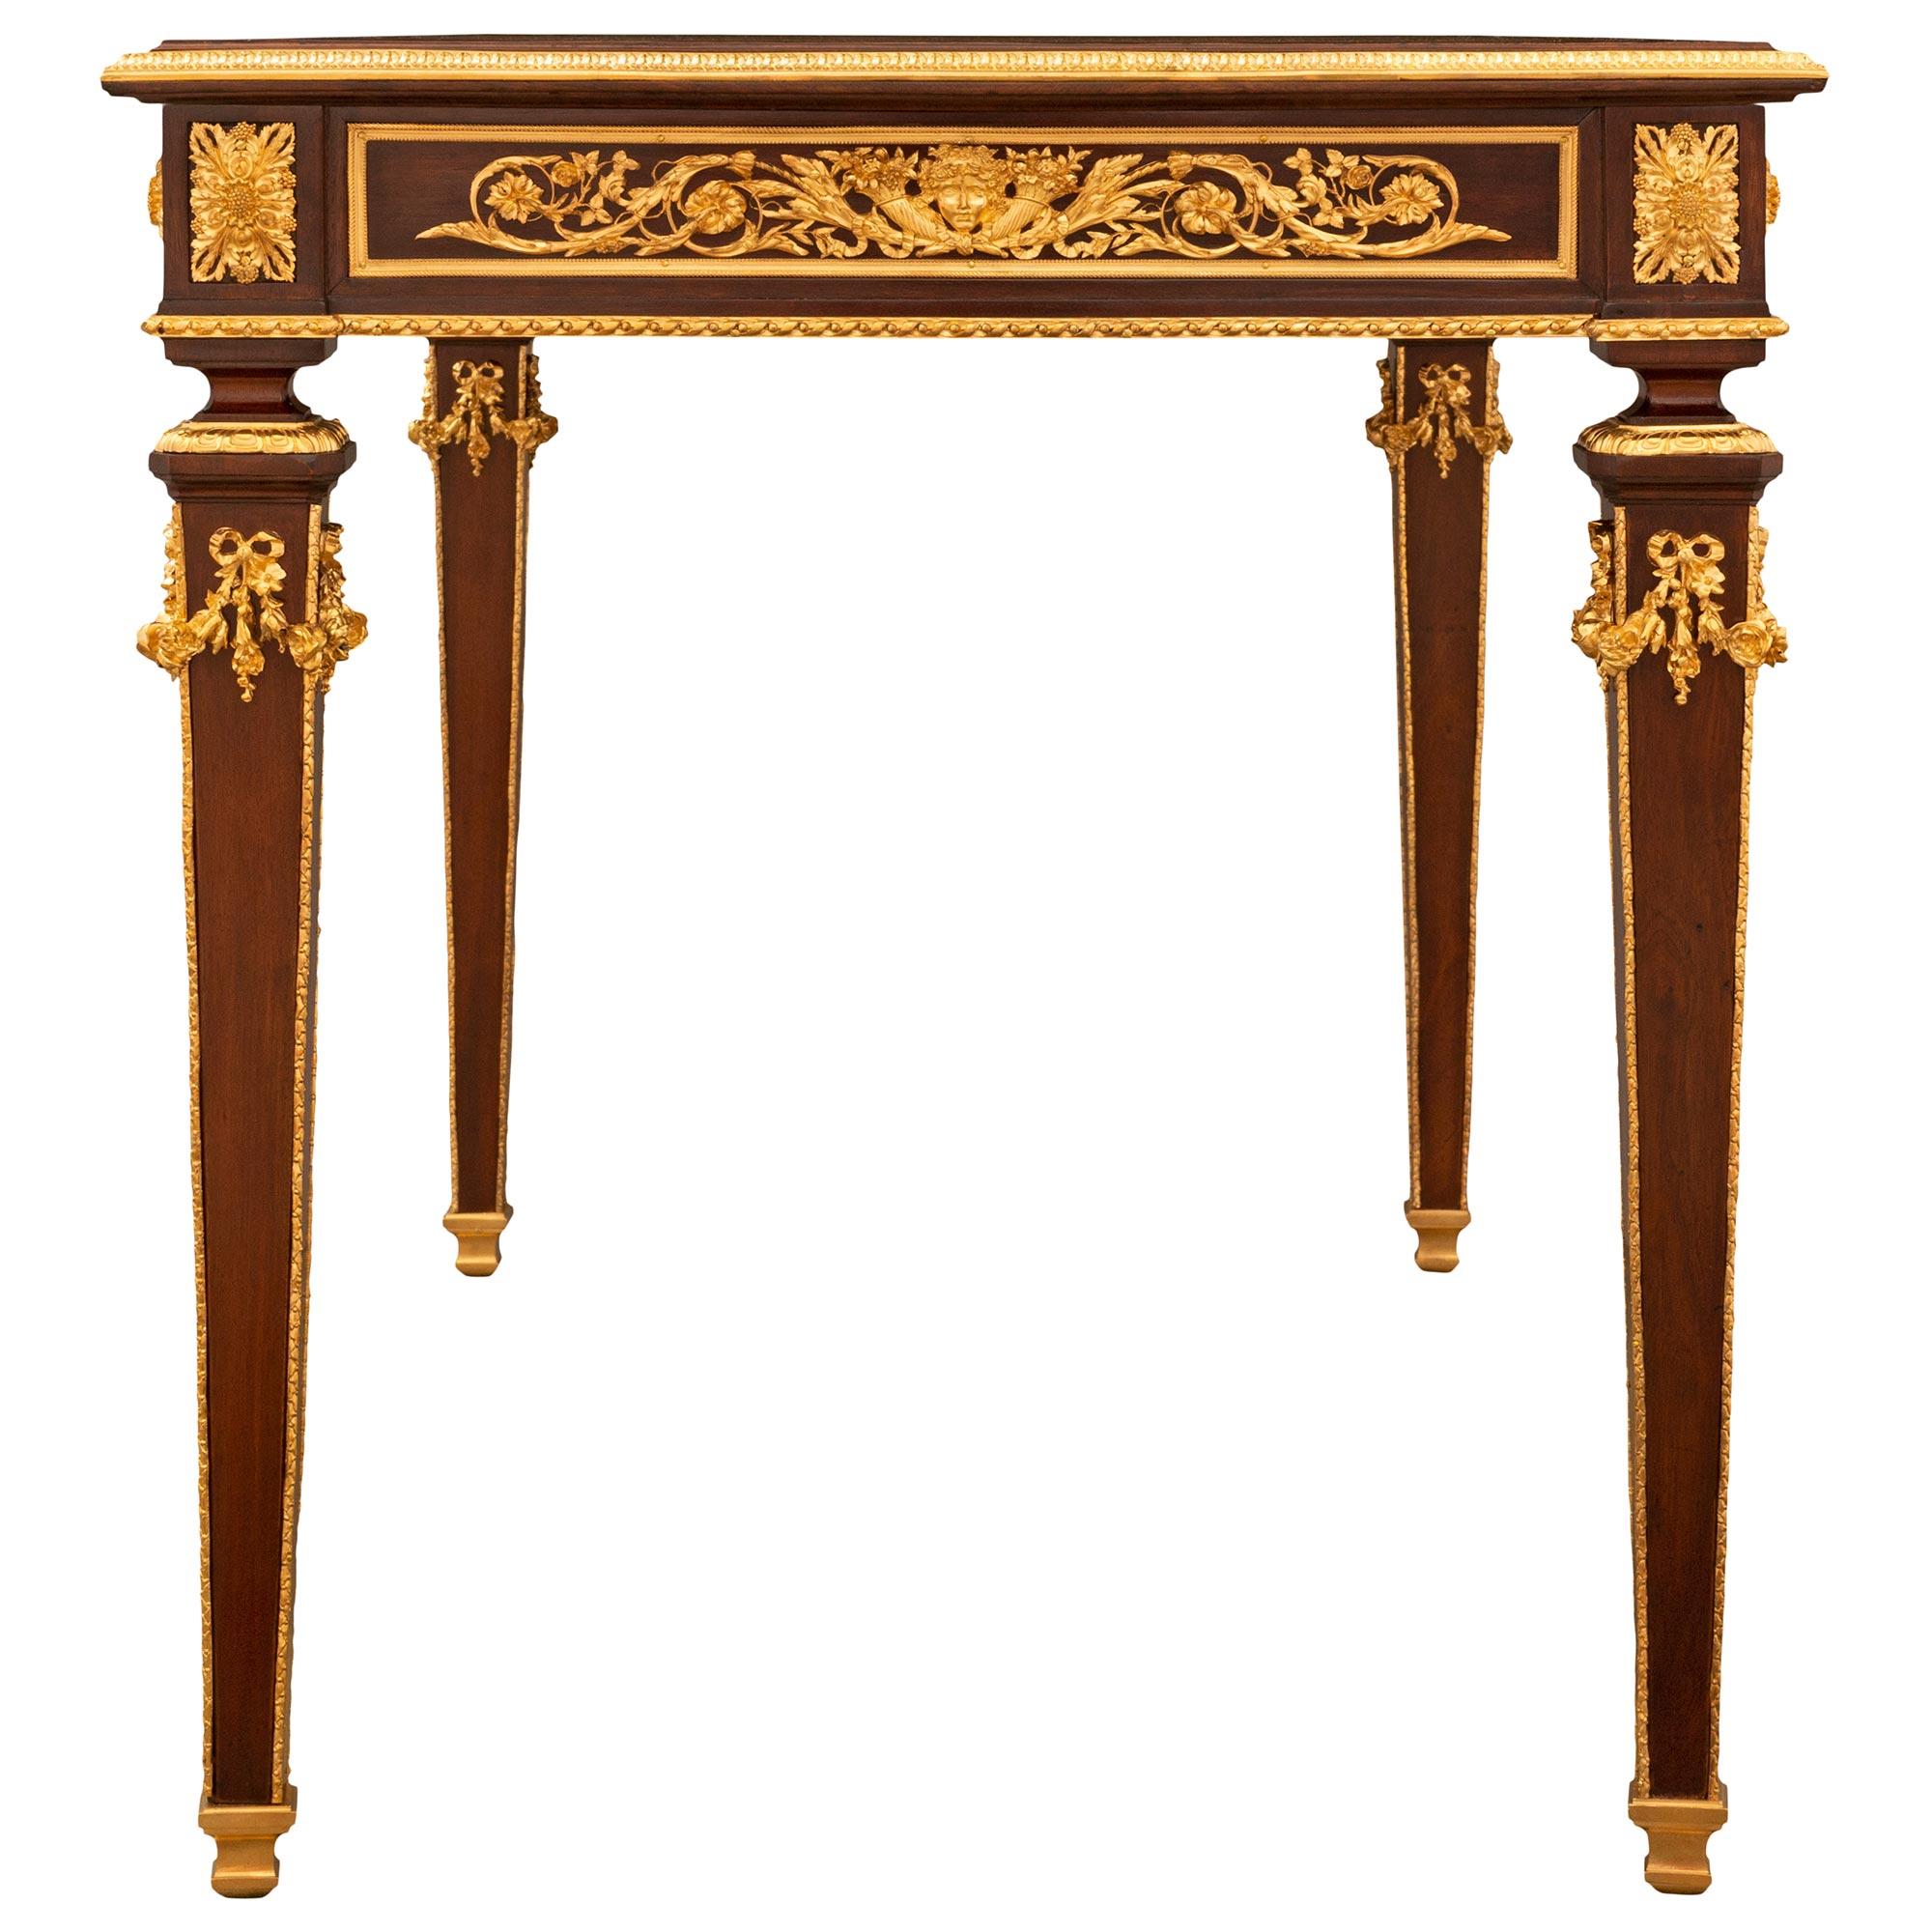 French 19th Century Belle Époque Period Mahogany, Brass and Ormolu Desk For Sale 1